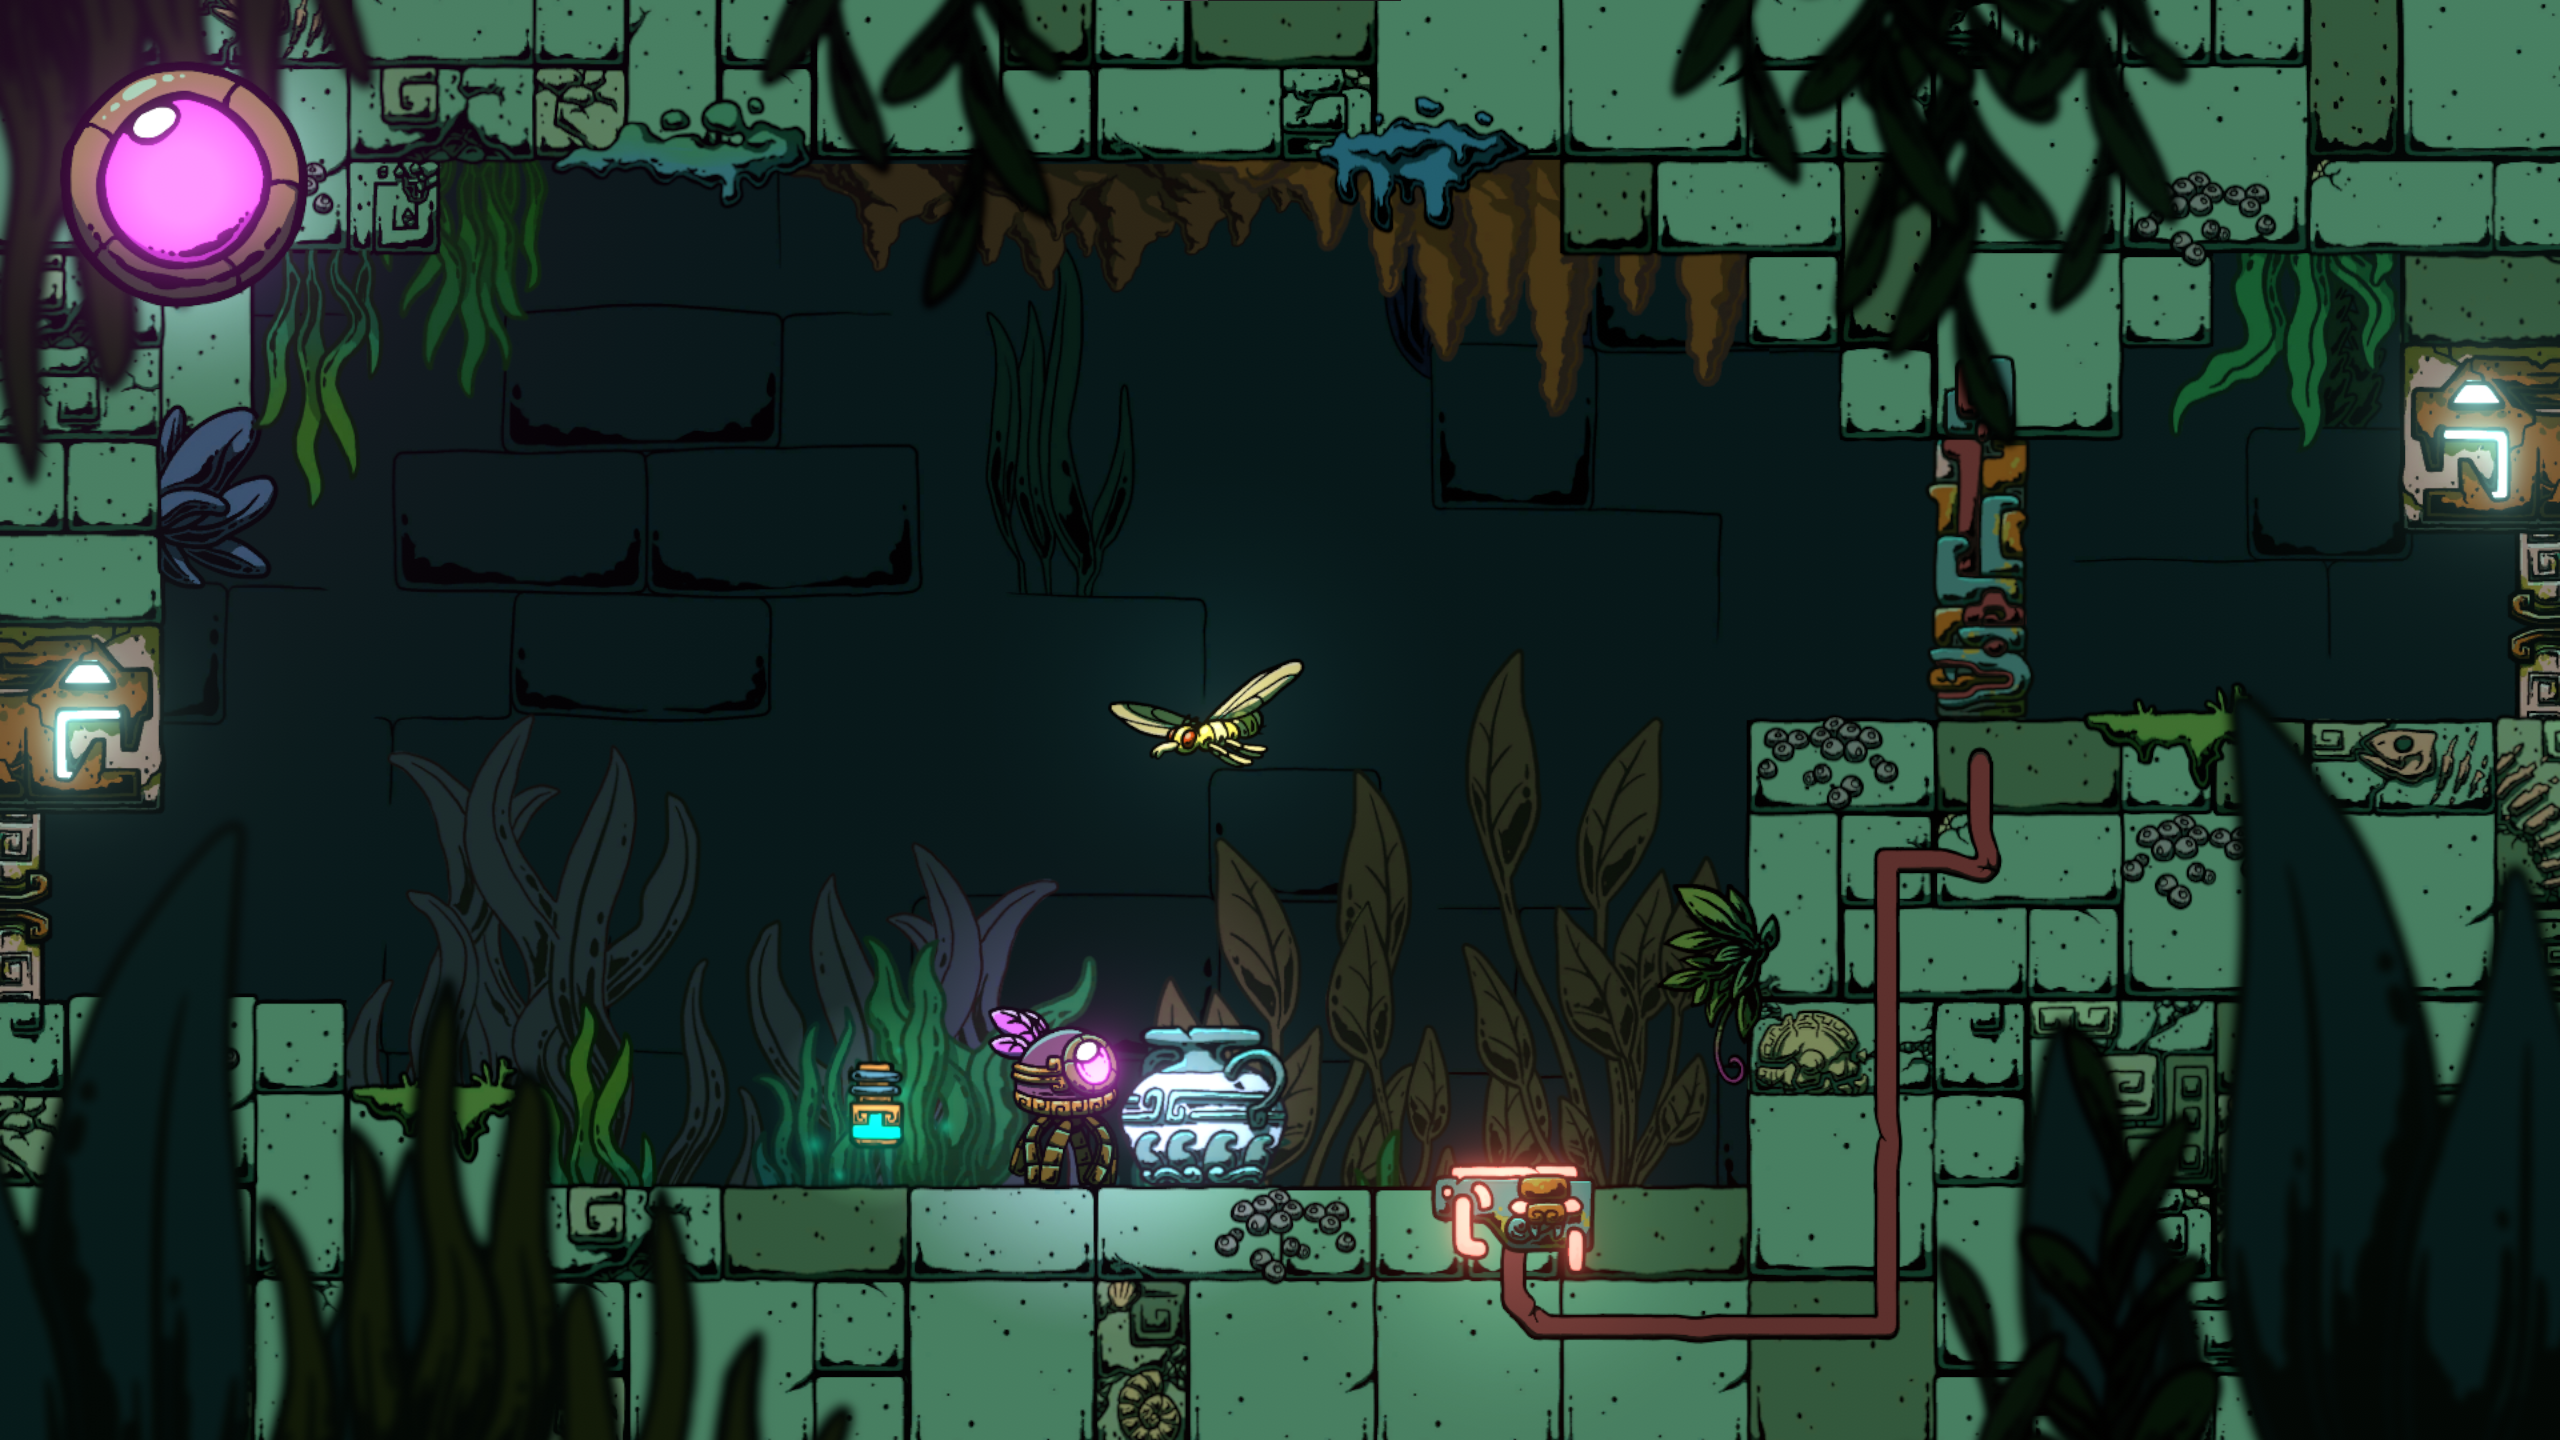 Puzzle and Enemy Room